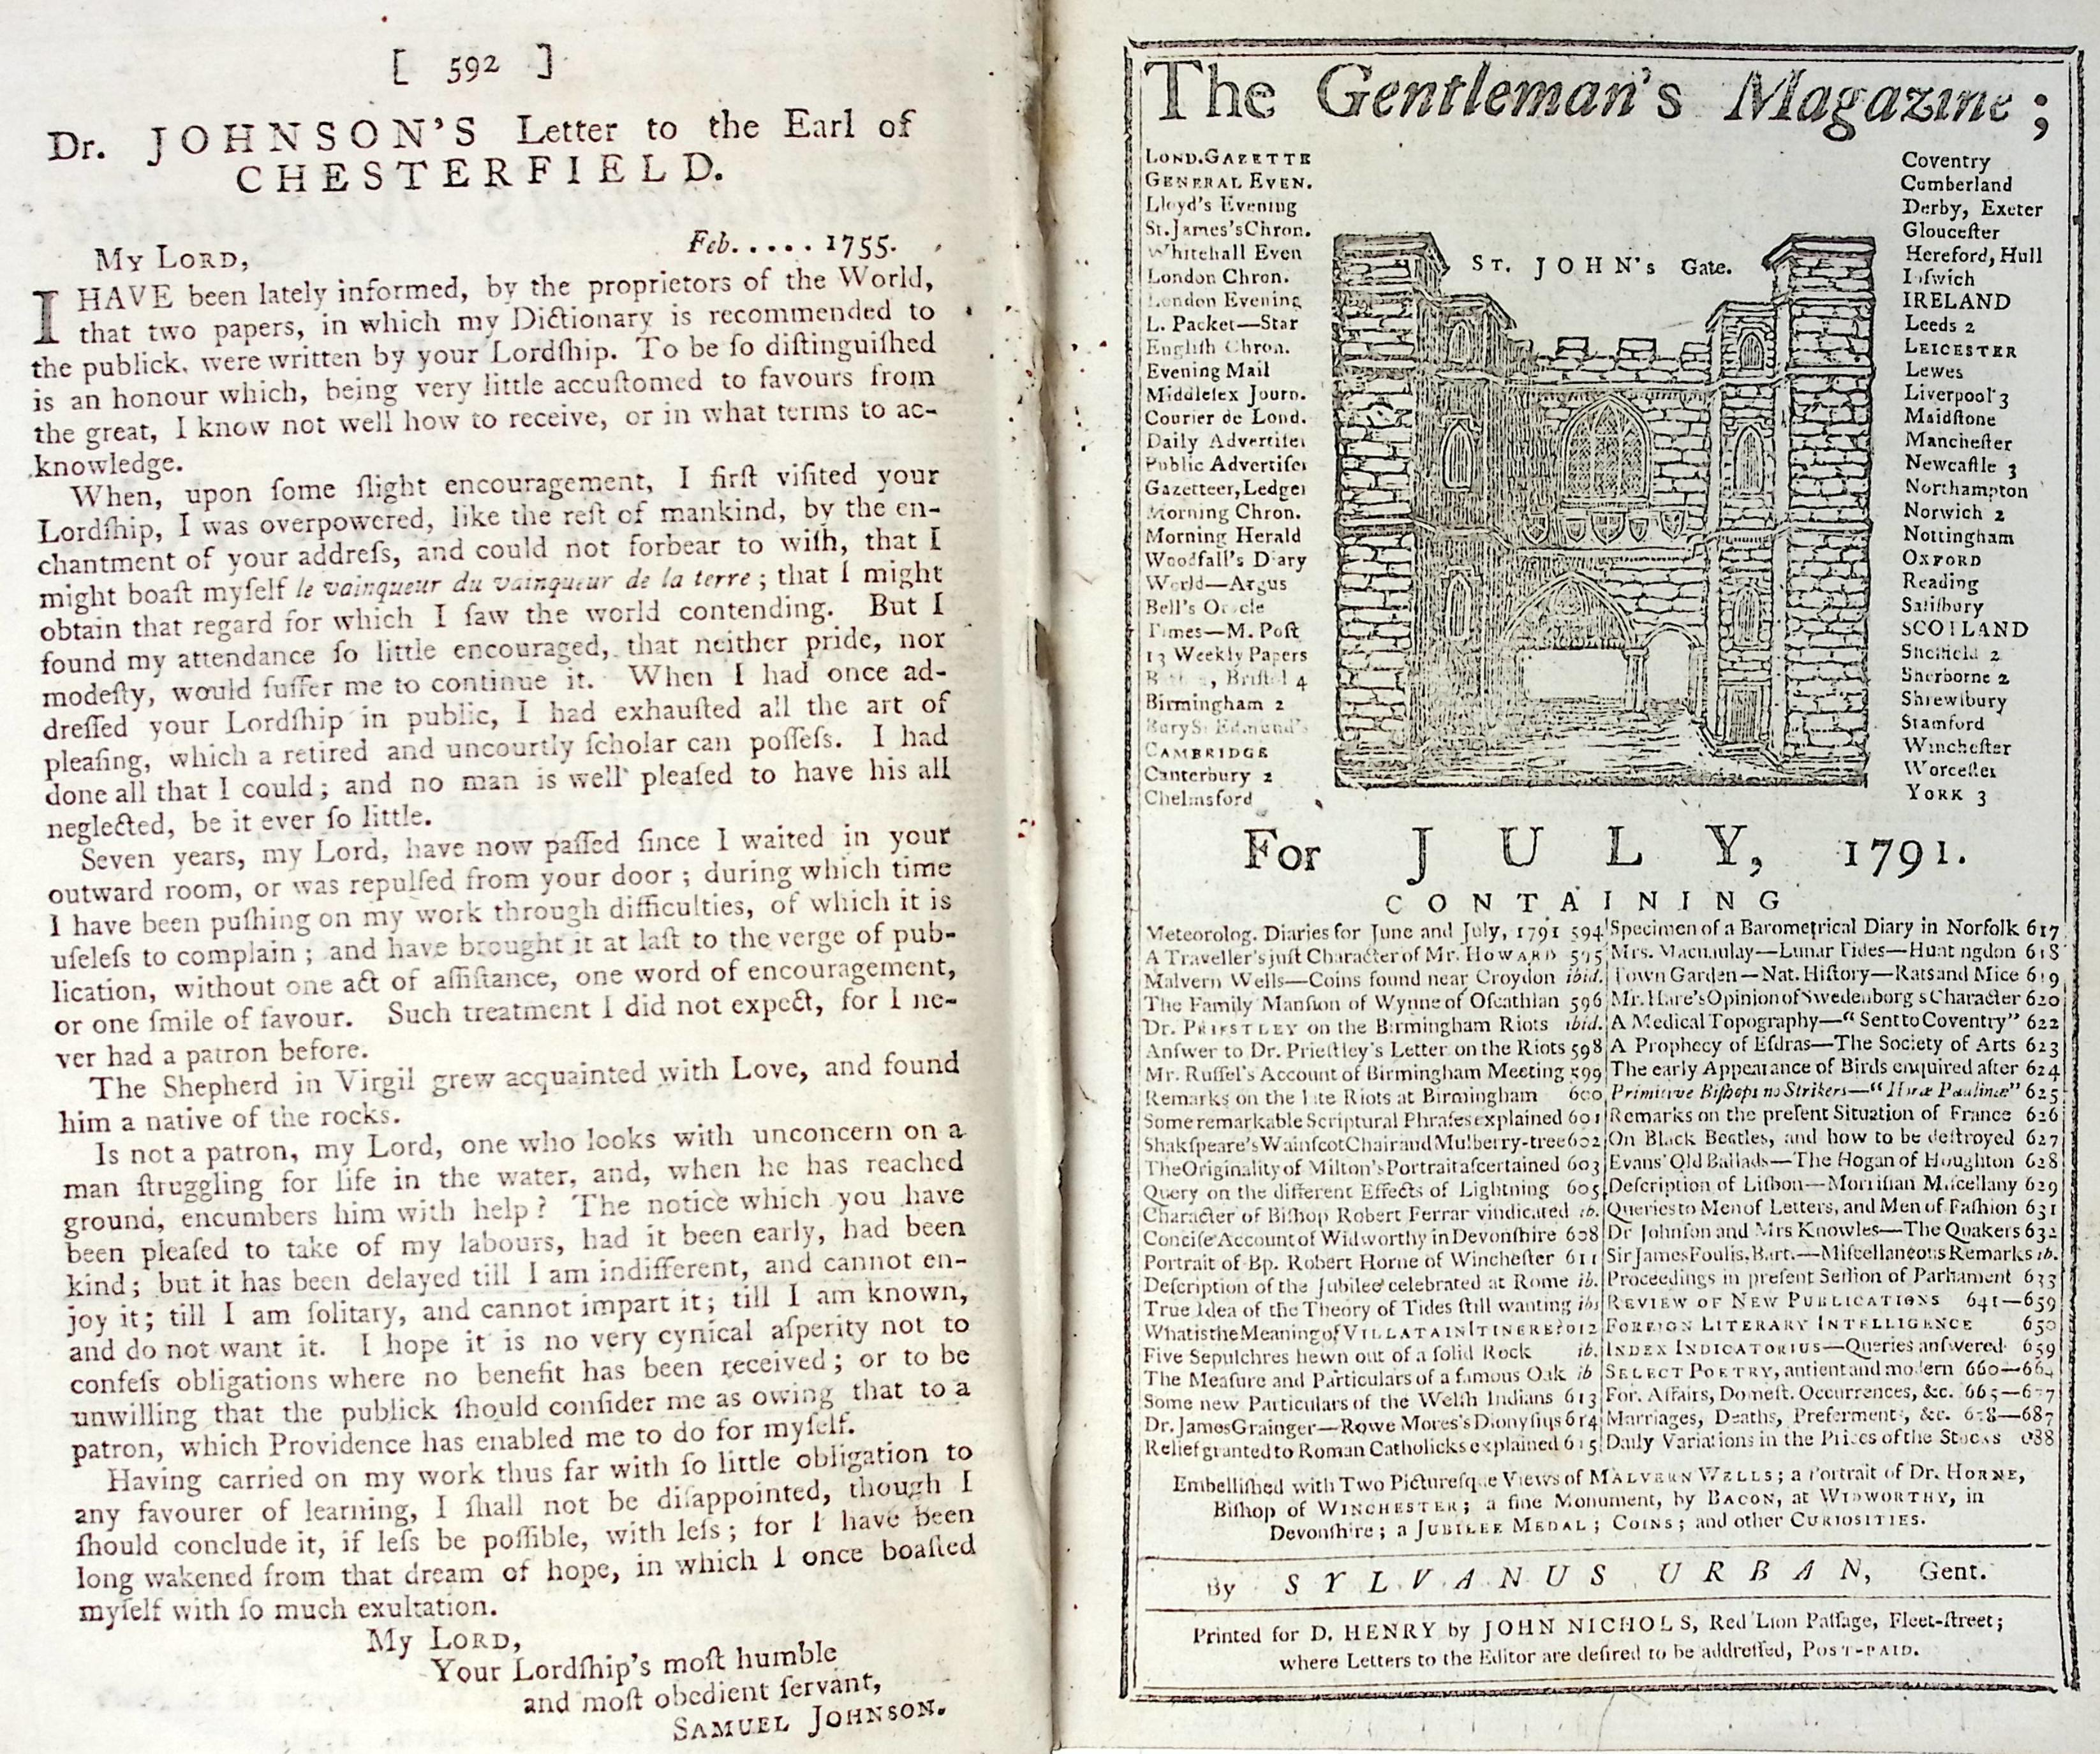 The Gentleman's Magazine and Historical Chronicle. Volume LXI (61) Part 2. July to December 1791.